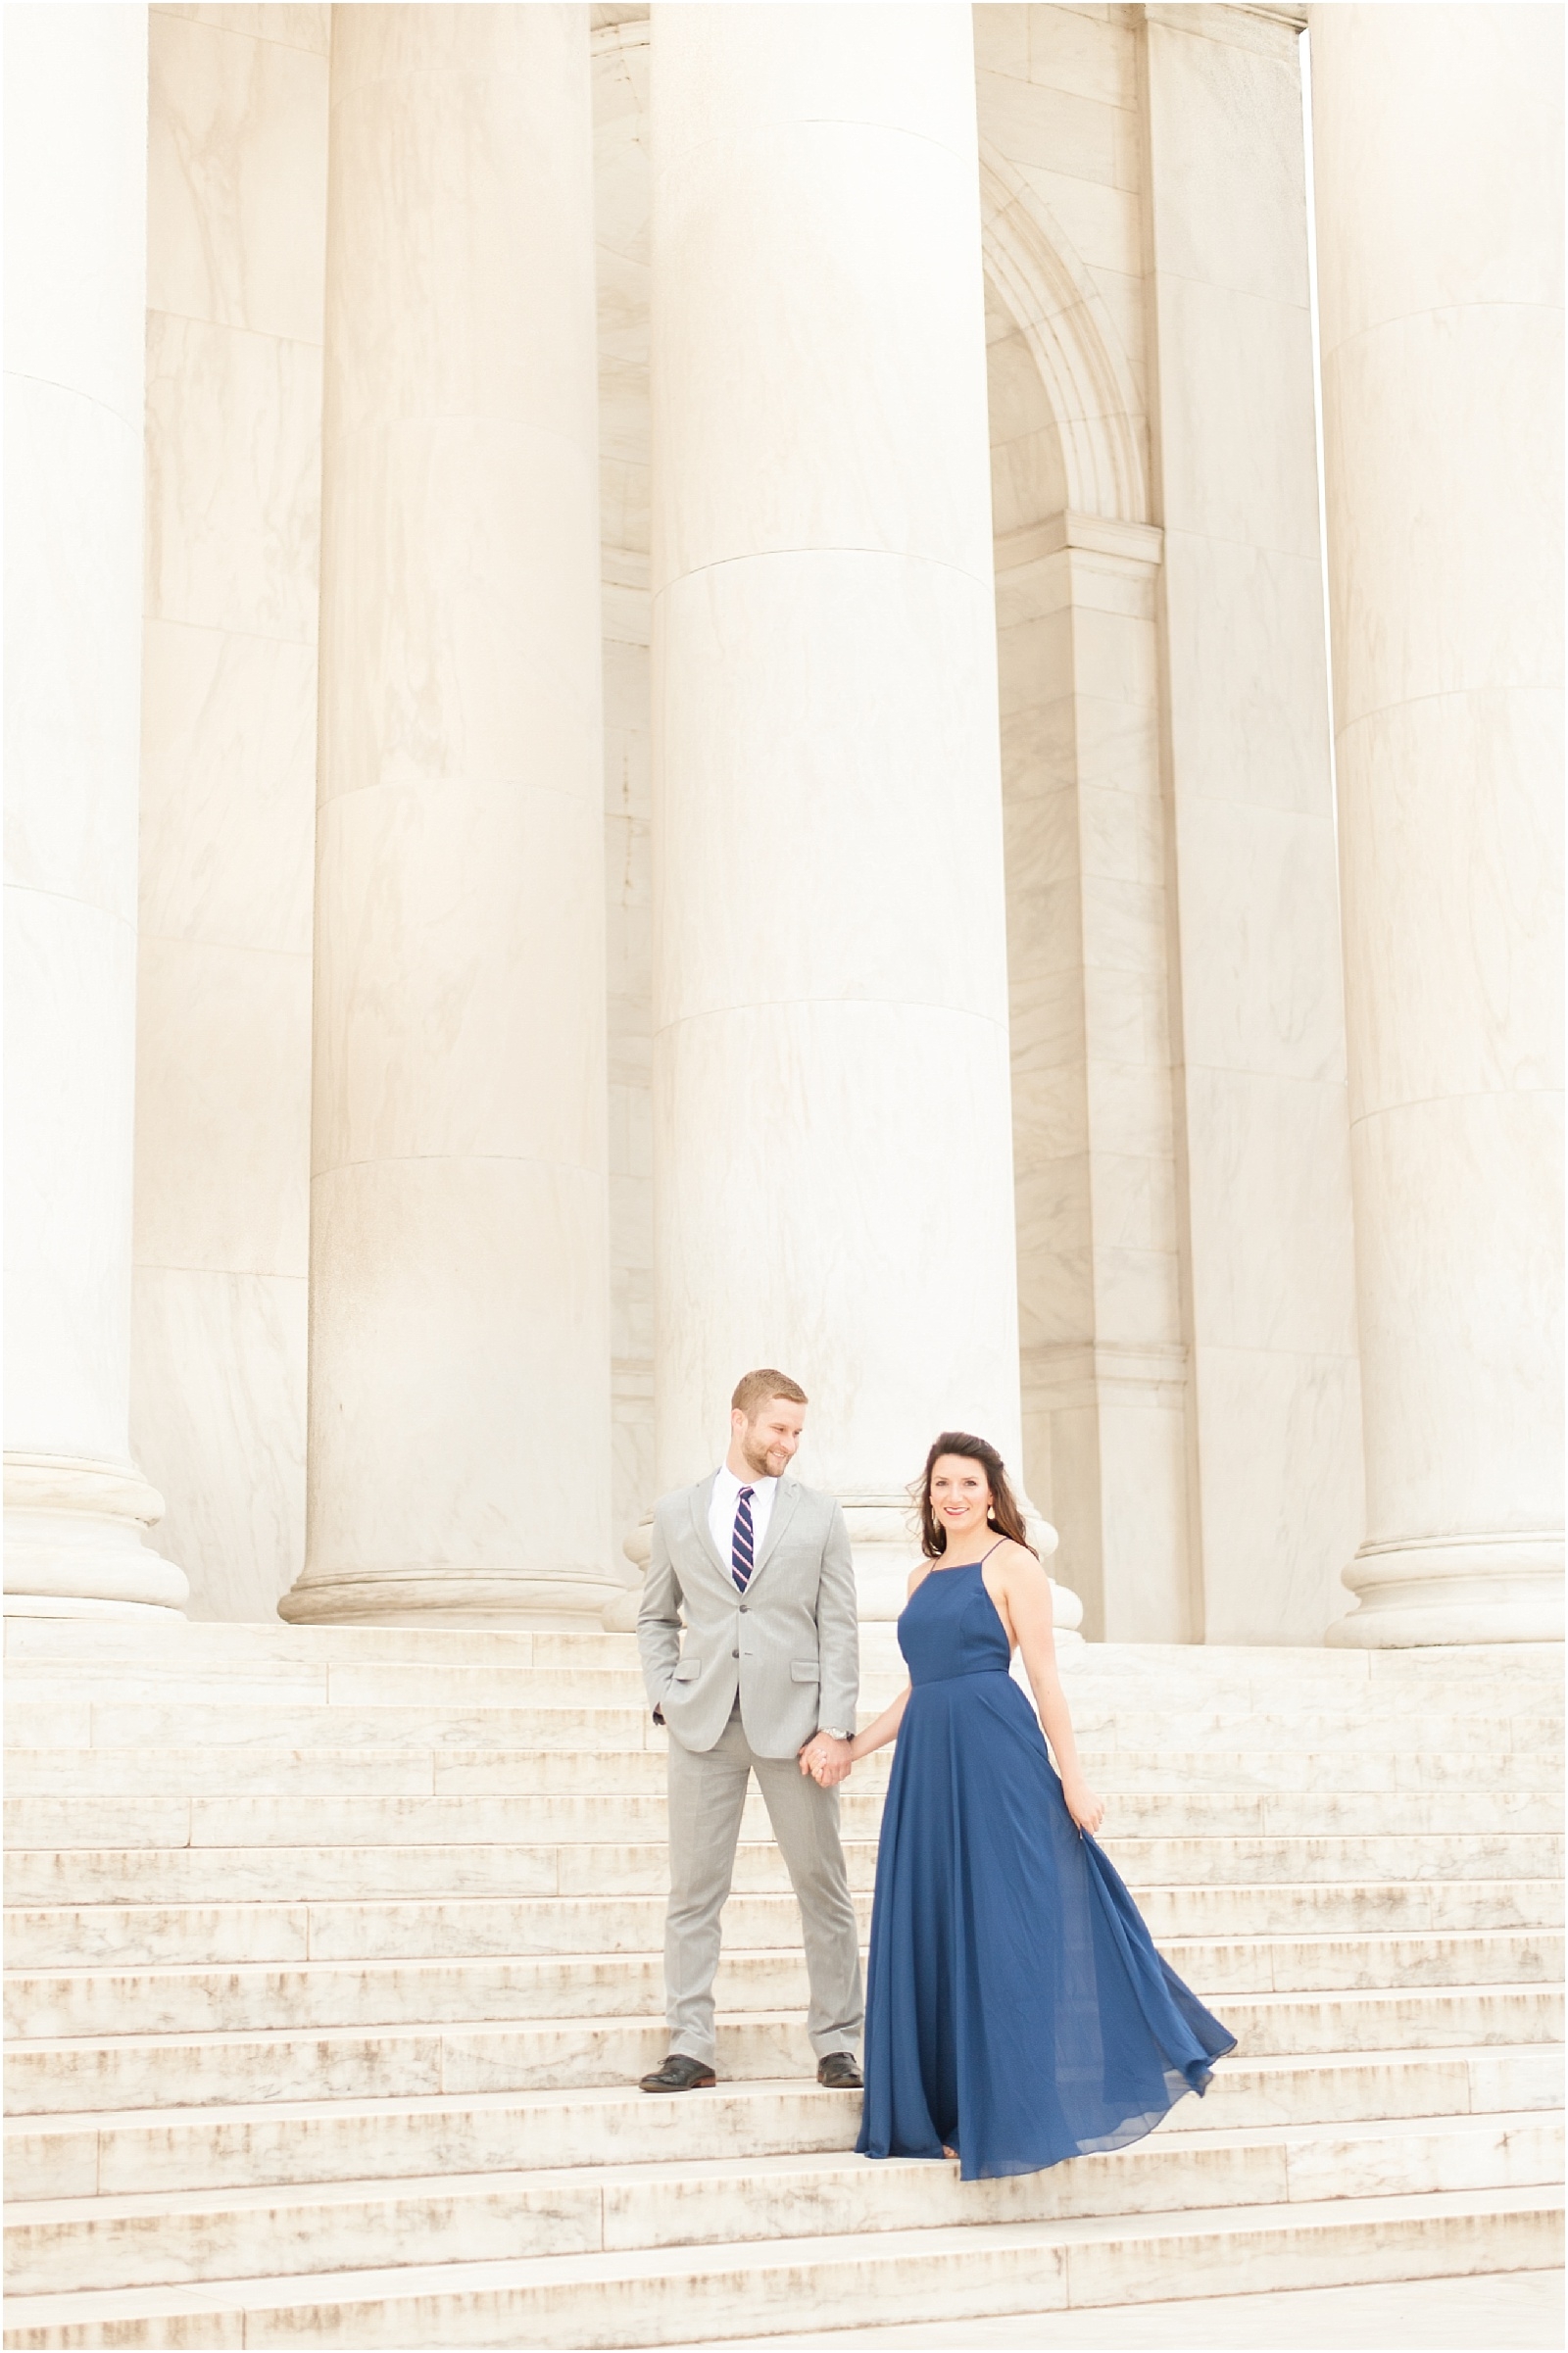 0004 Bret and Brandie Photography| Washington DC Engagement | Megan and Connor.jpg